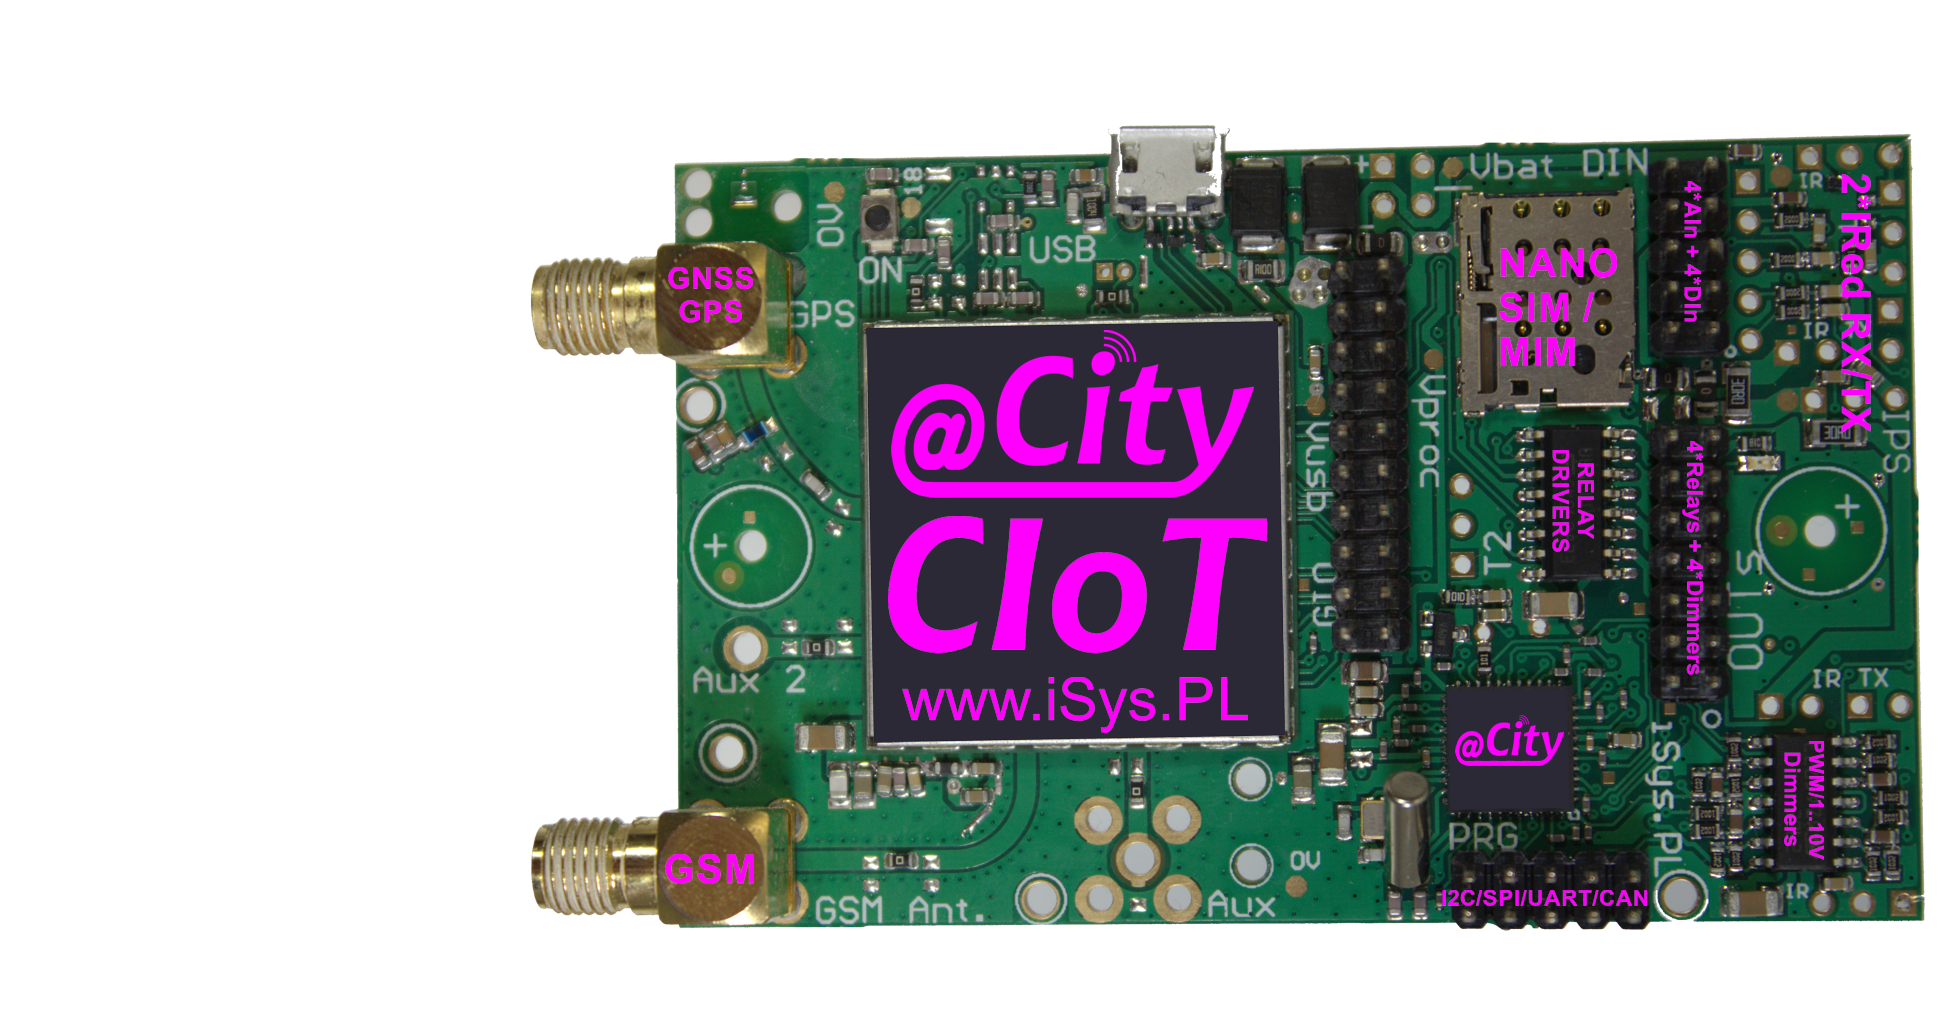 eCity Universal controller with GSM/NB1/LTE-M1 and GPS/GNSS interfaces
